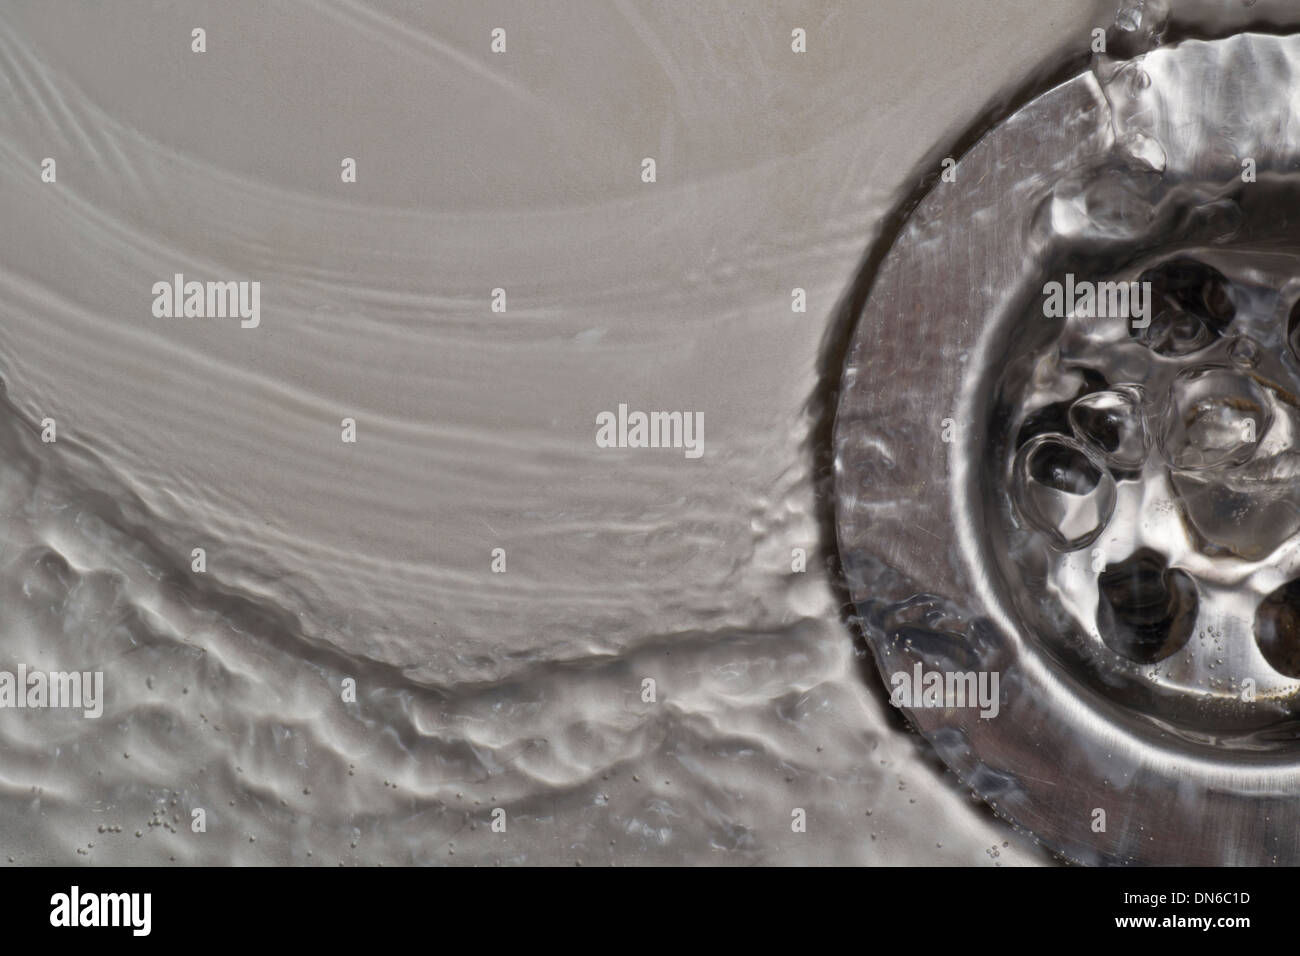 Close up of sink with water drops Stock Photo